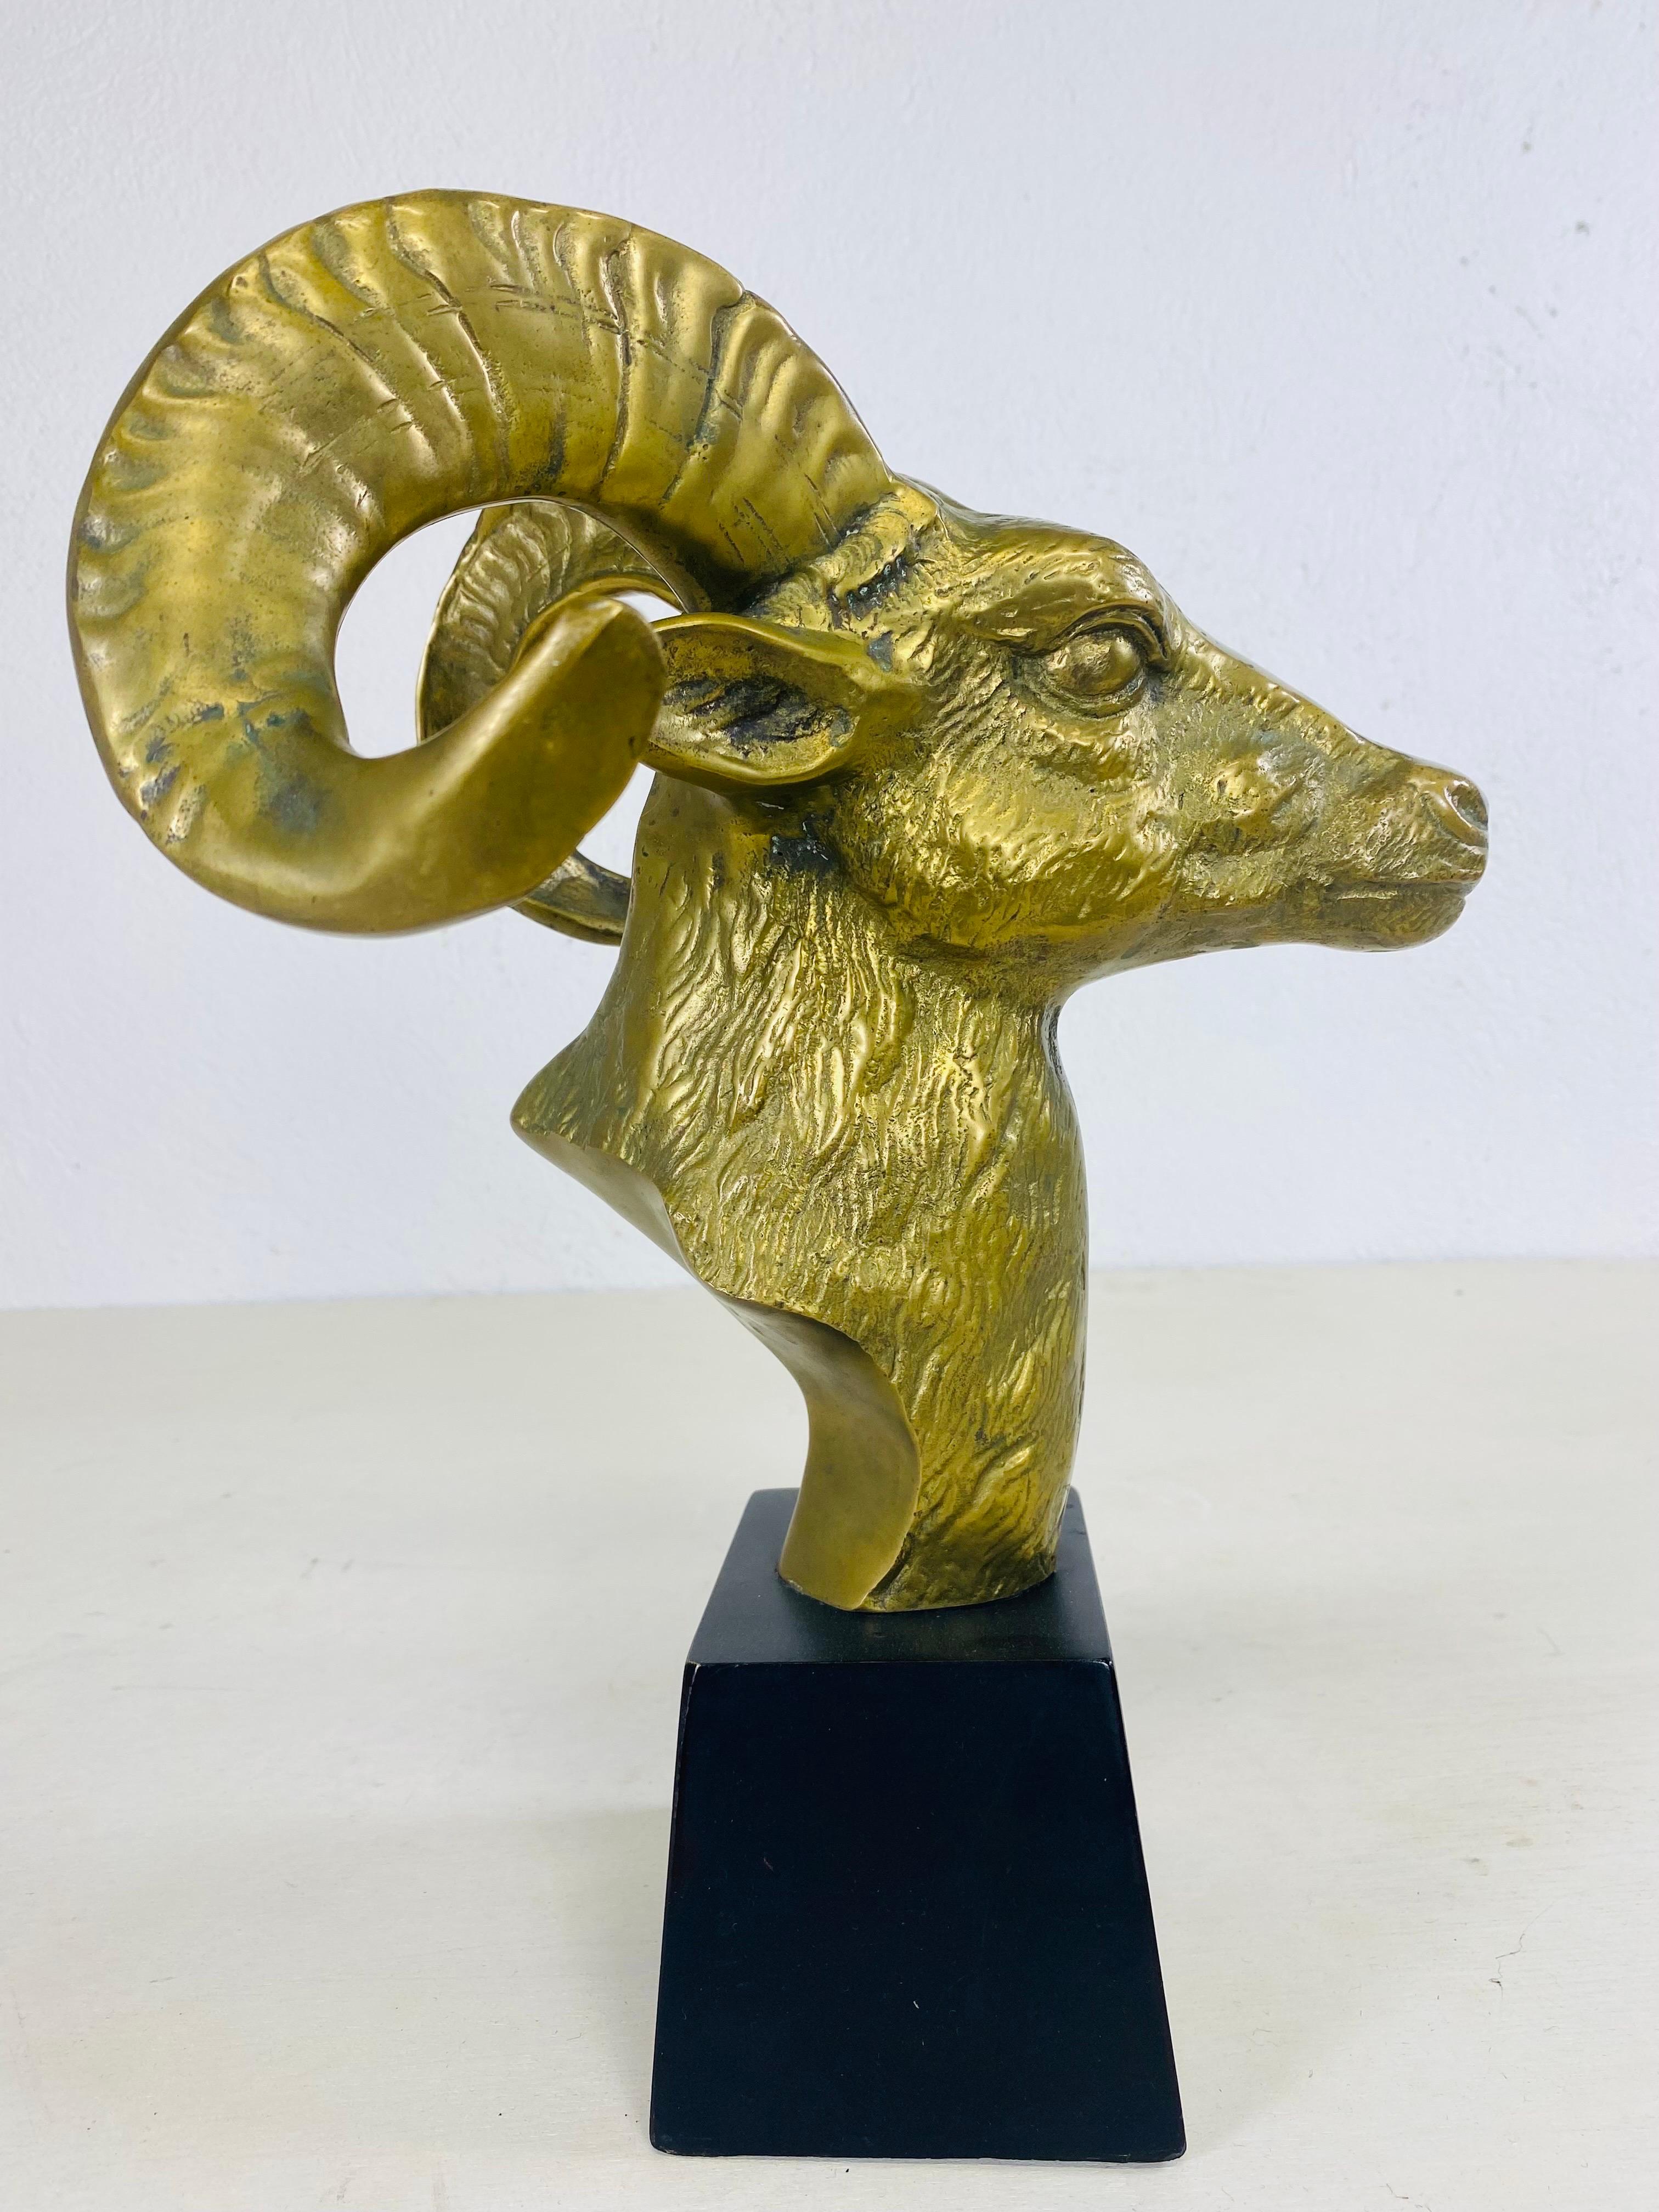 Midcentury Vintage Solid Brass Ramshead Bust In Good Condition For Sale In Allentown, PA